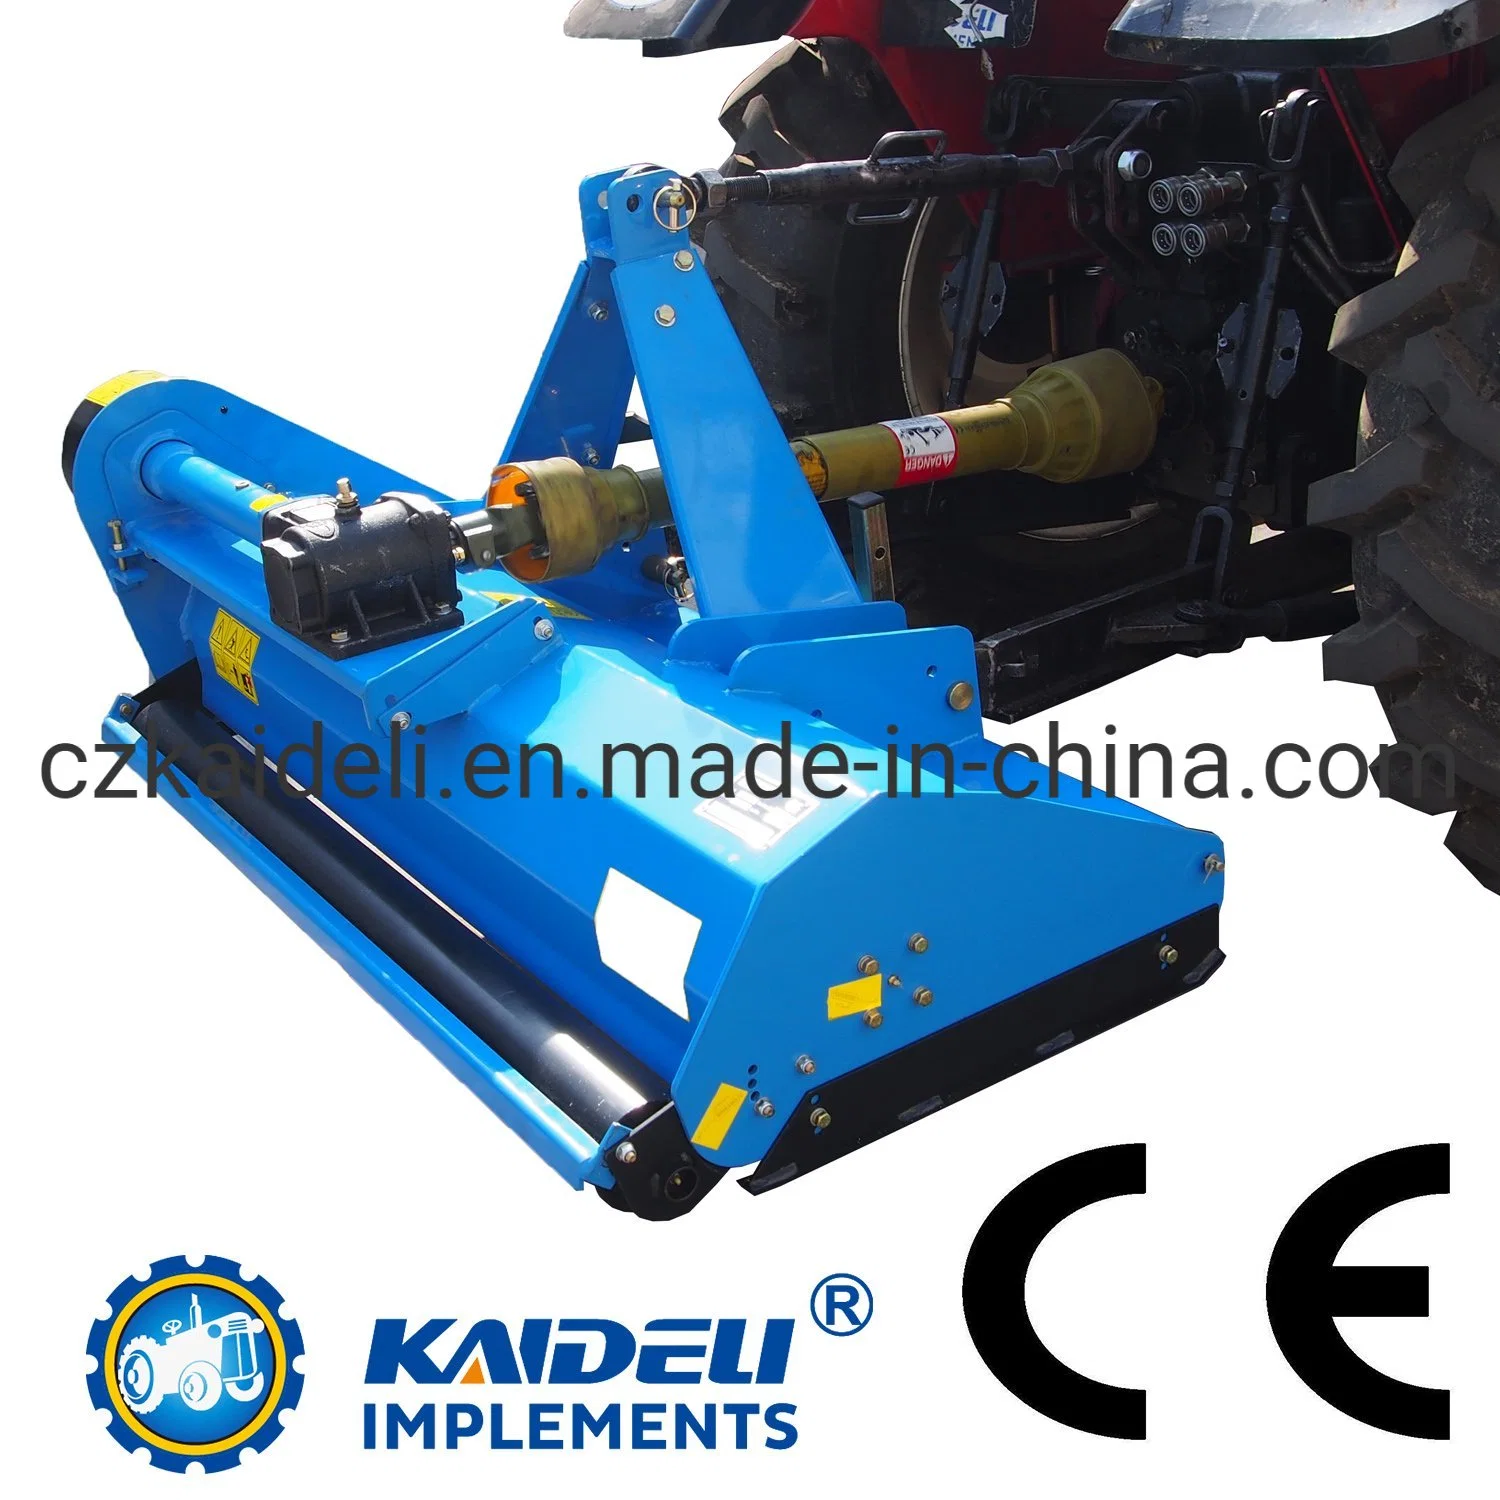 Light Grass Lawn Mower for Tractor